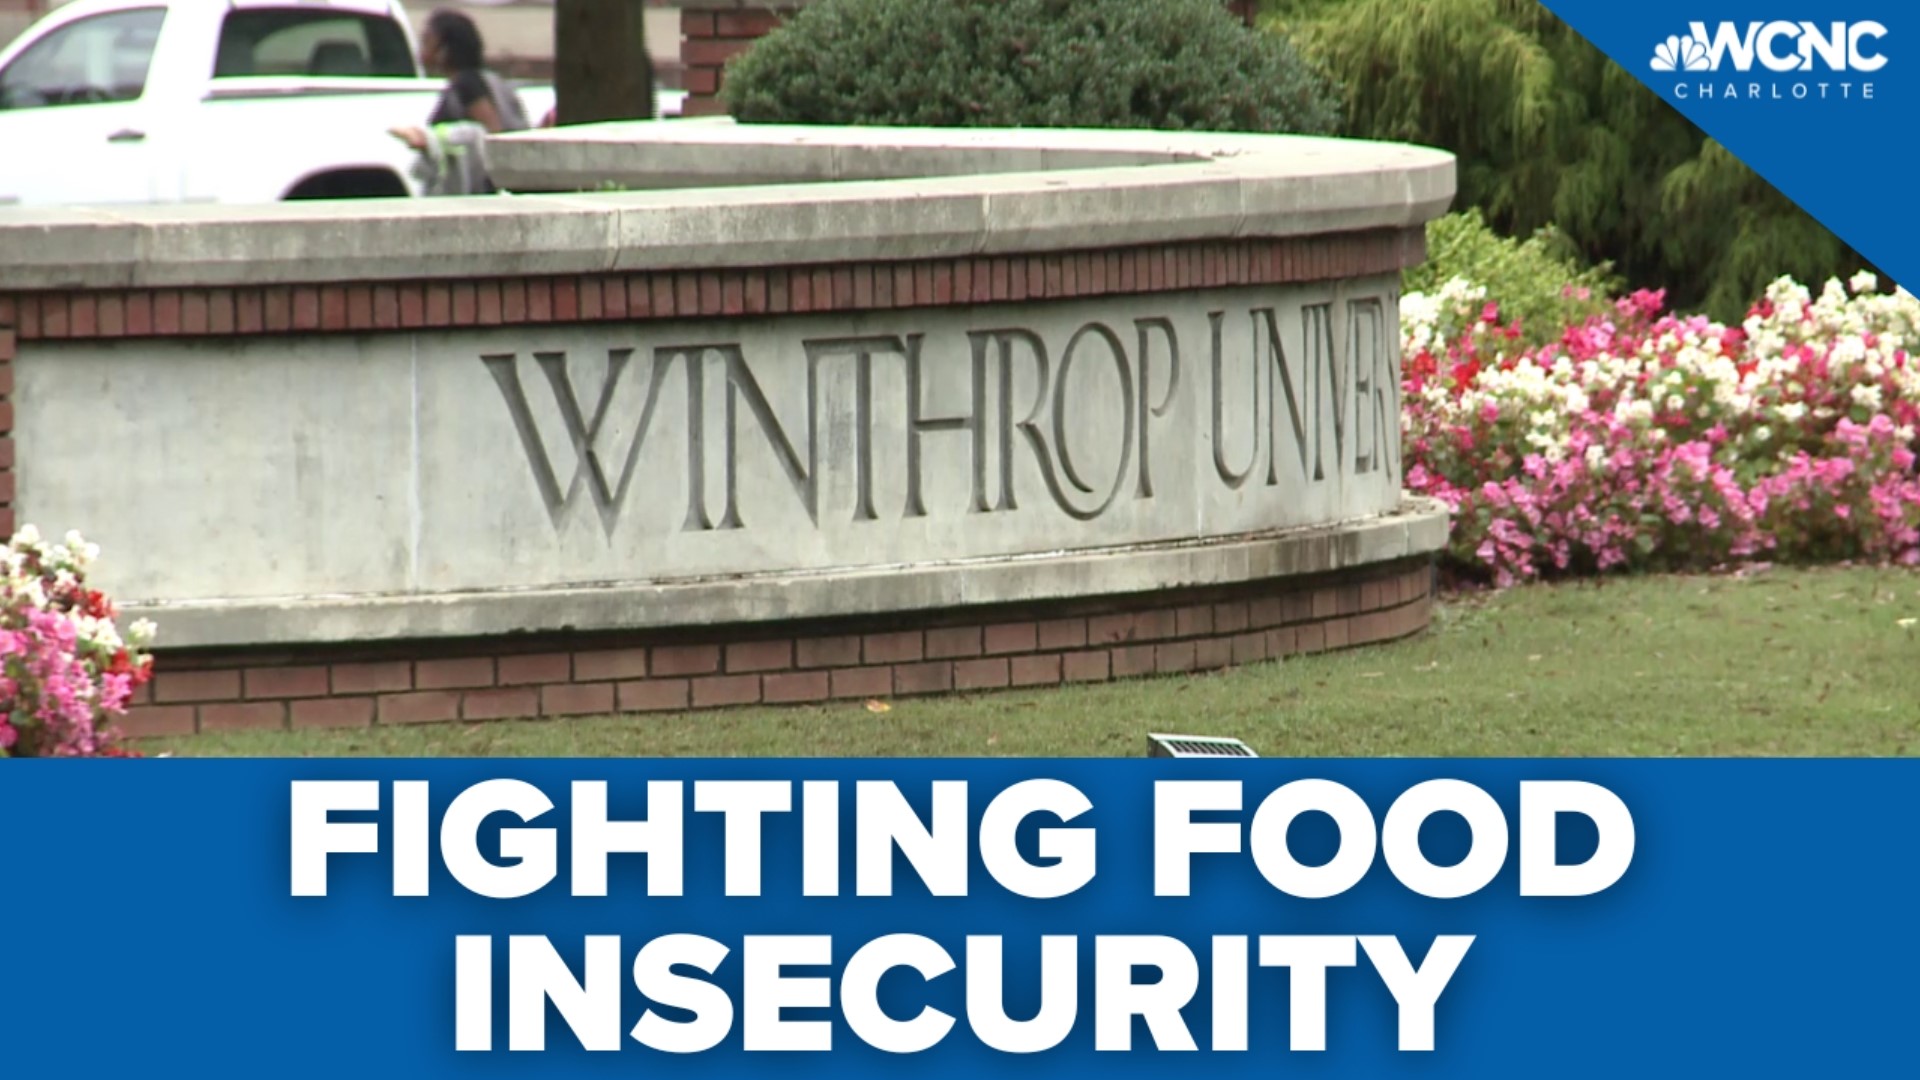 Winthrop University's Department of Human Nutrition established a food pantry called The Food Box, which offers shelf-stable food and personal care items.